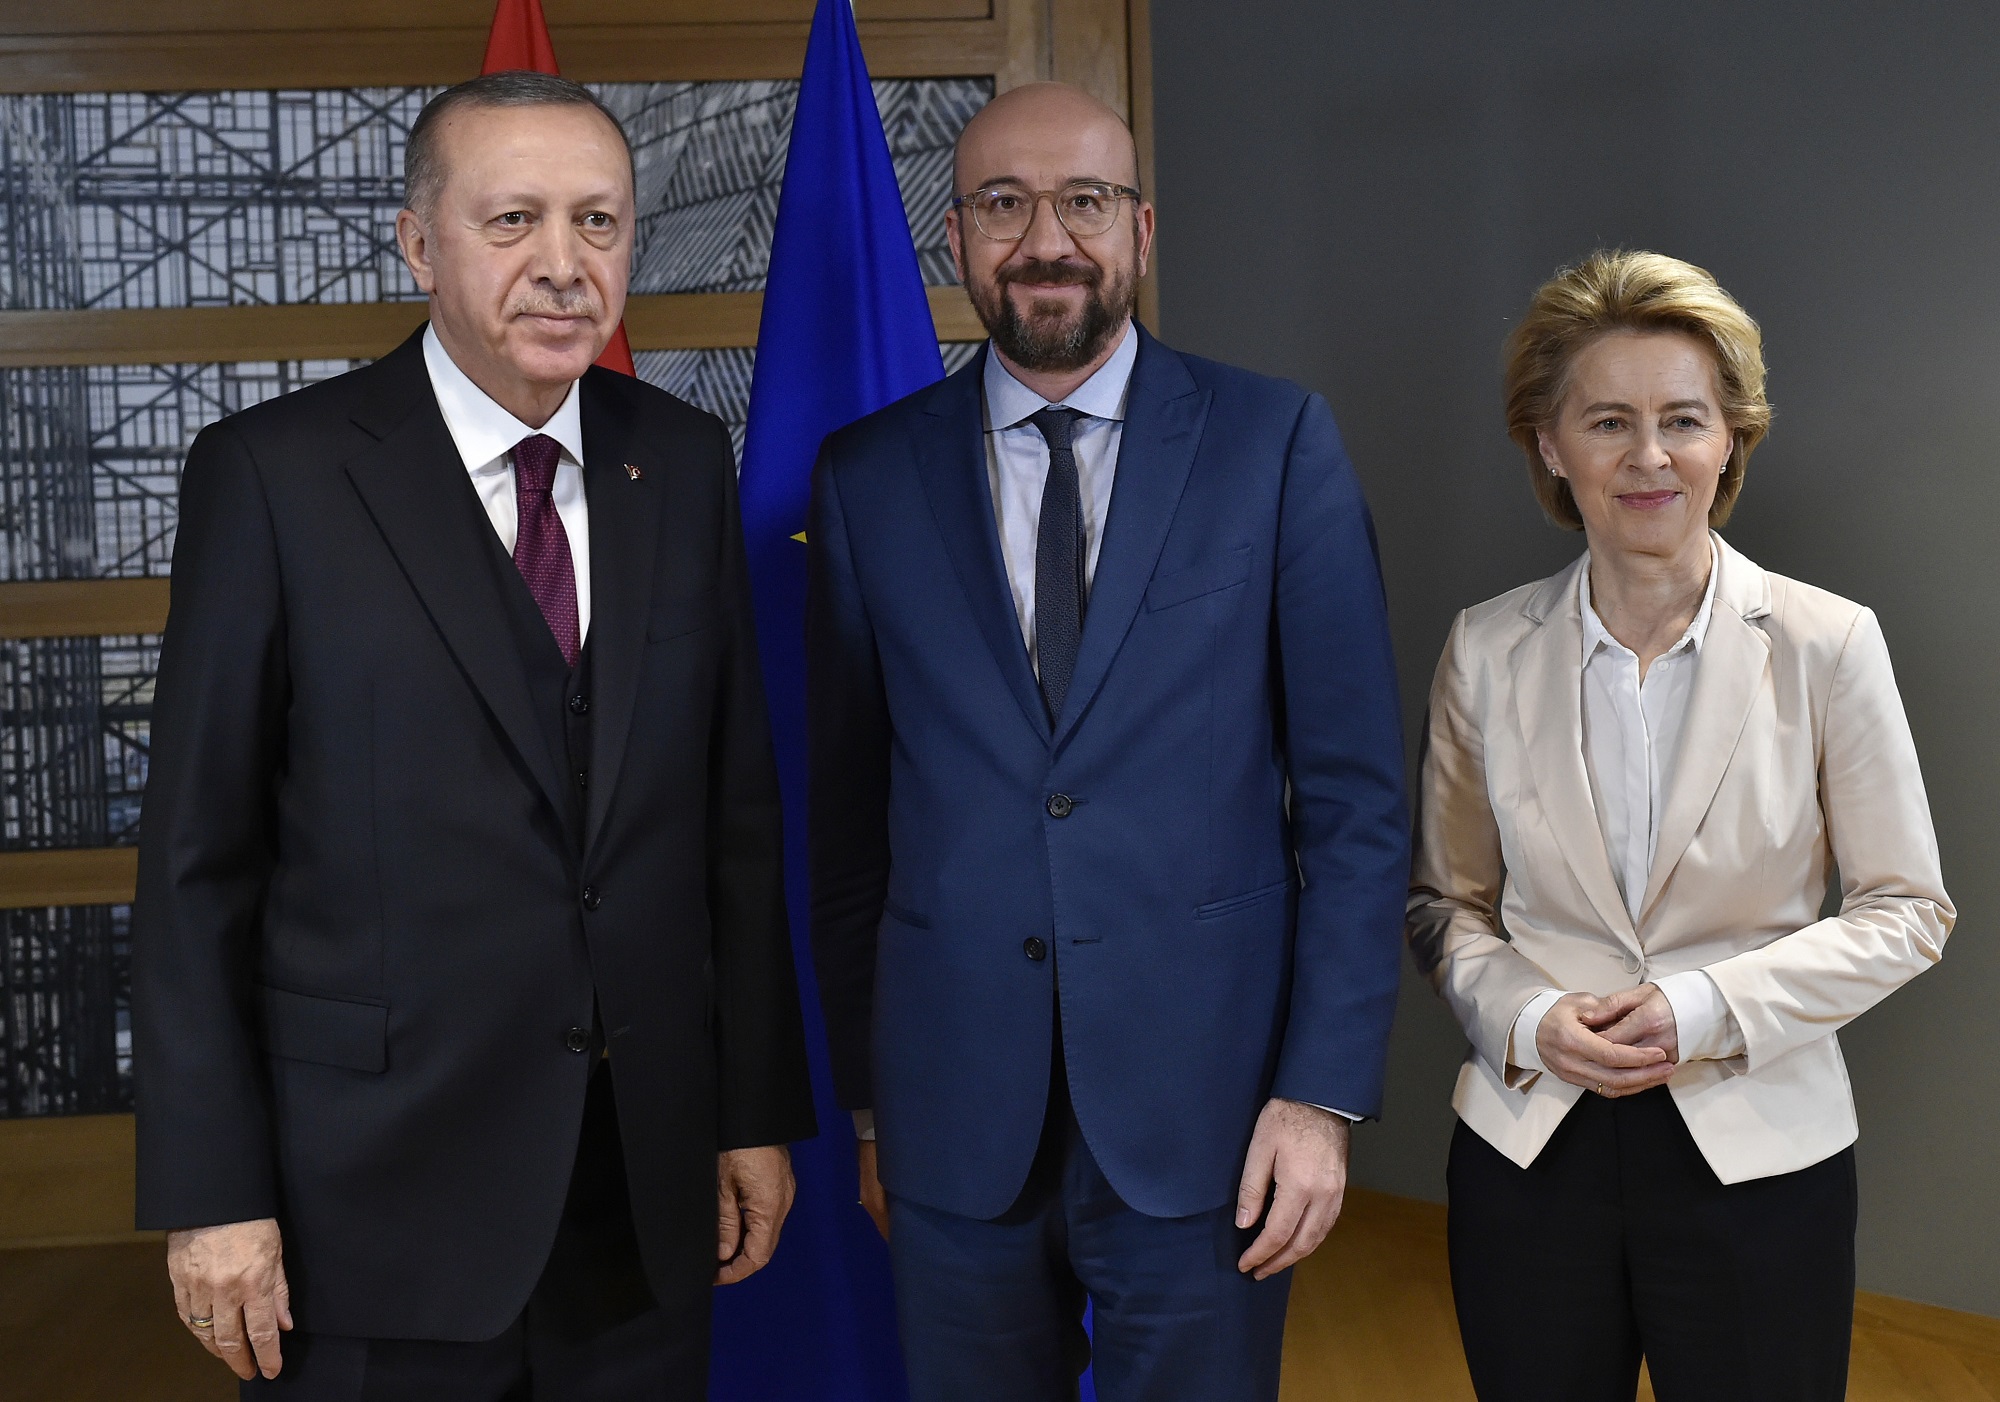 Turkish President Recep Tayyip Erdogan, left, is welcomed by European Council President Charles Michel, center, and European Commission President Ursula von der Leyen at the European Council building in Brussels, Monday, March 9, 2020. Turkish President Recep Tayyip Erdogan visits Brussels on Monday for talks with EU and NATO officials amid a standoff between Ankara and Brussels over sharing of responsibility for refugees and migrants. (John Thys, Pool Photo via AP)